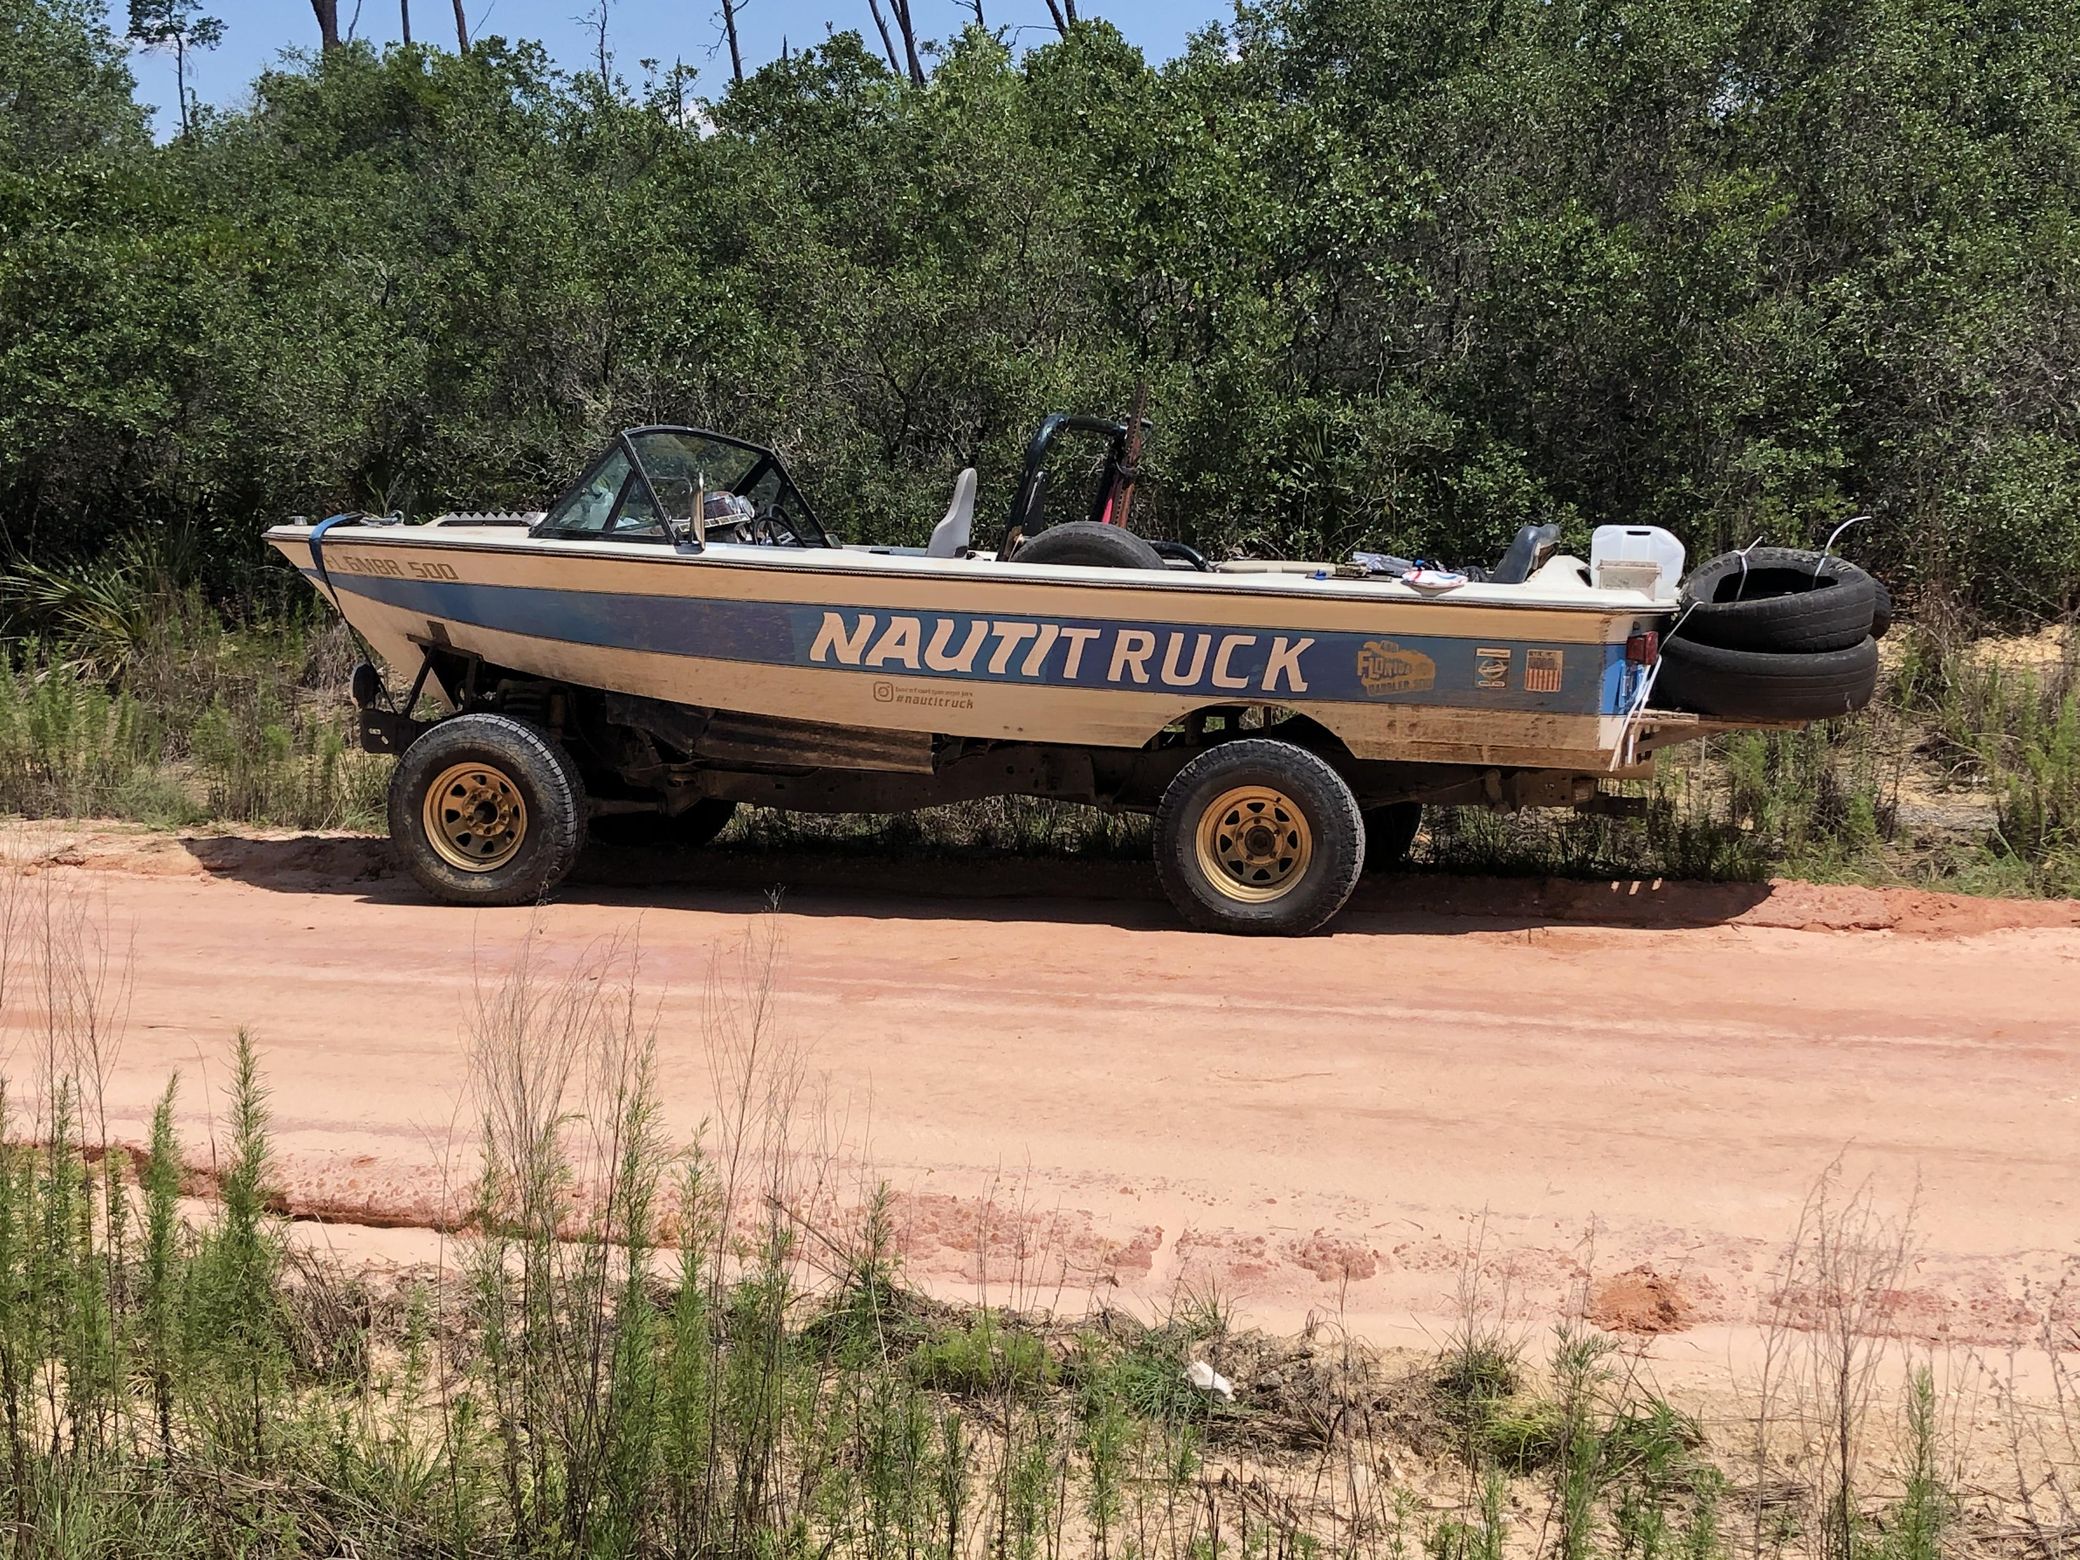 Someone Paired an F-150 With a Boat to Make an Absurd Off-Road Machine